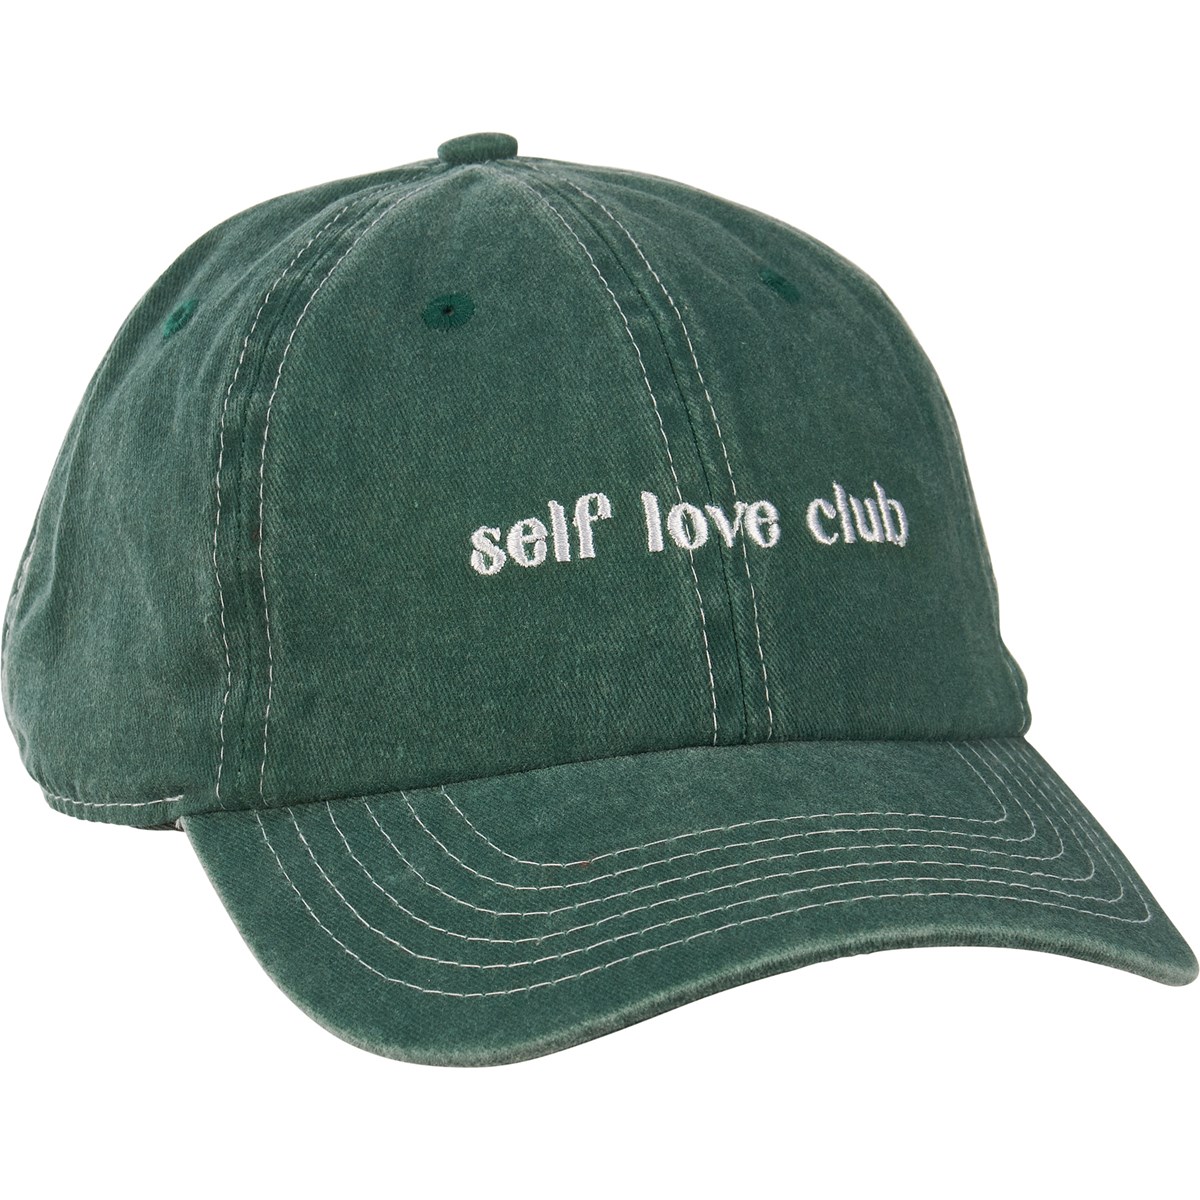 Baseball Cap - Self Love Club - One Size Fits Most - Cotton, Metal